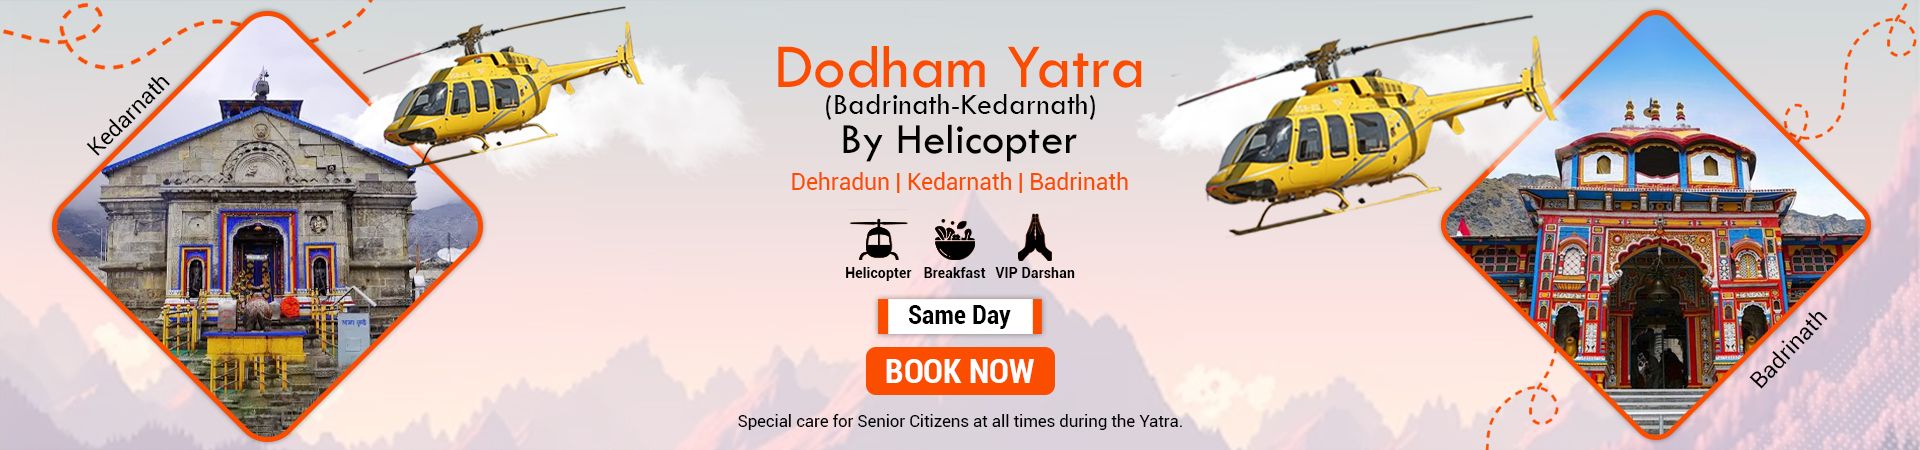 Do dham yatra by helicopter